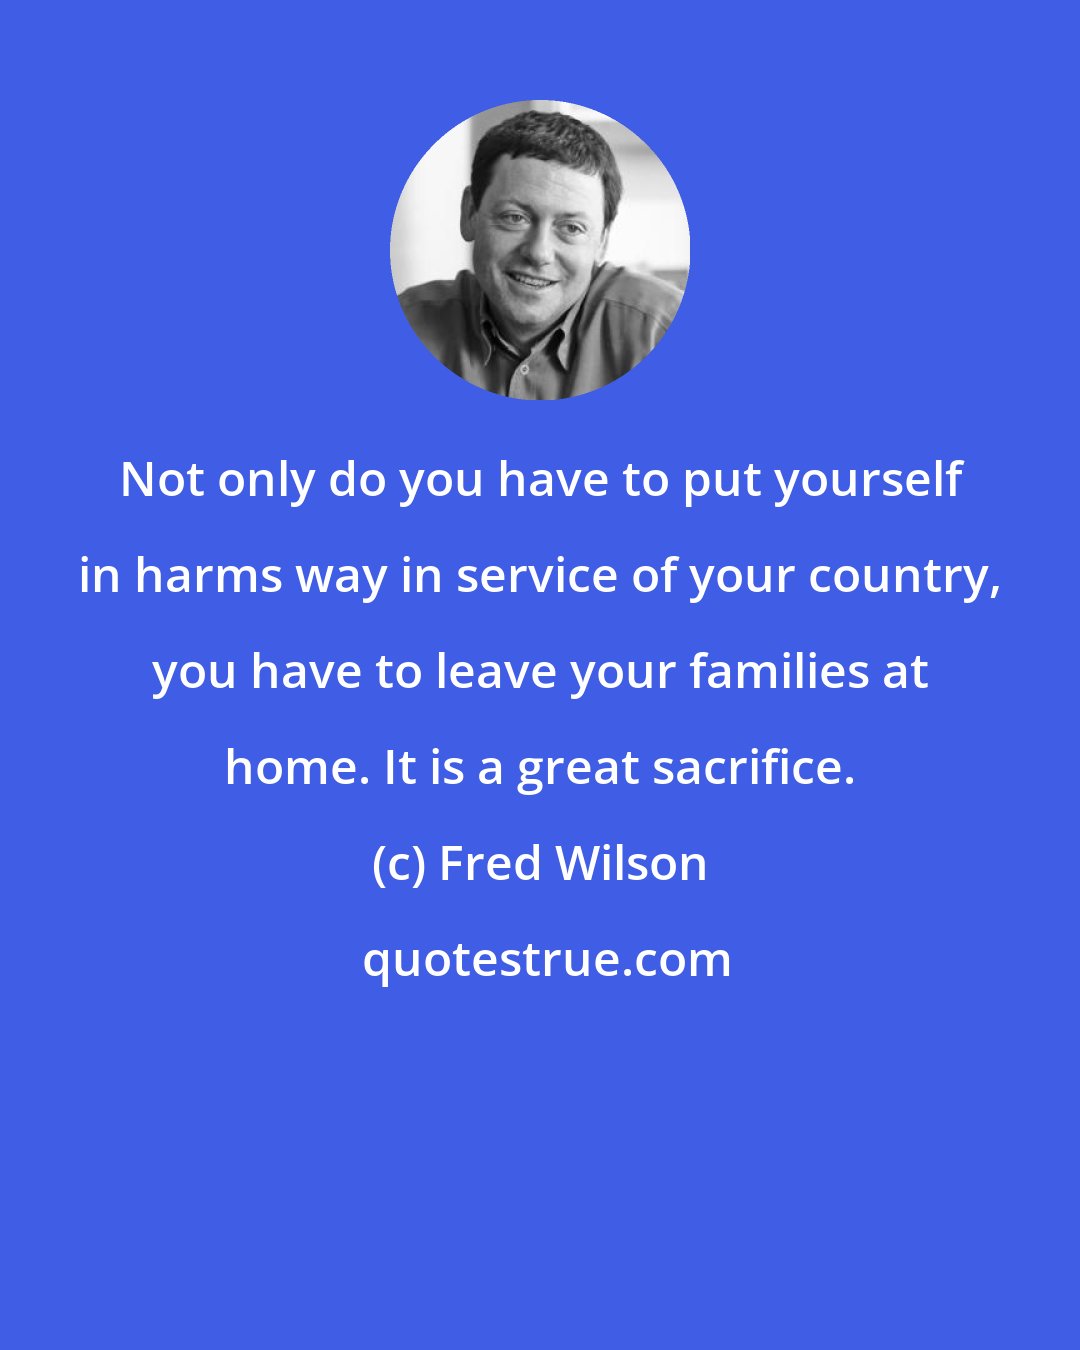 Fred Wilson: Not only do you have to put yourself in harms way in service of your country, you have to leave your families at home. It is a great sacrifice.